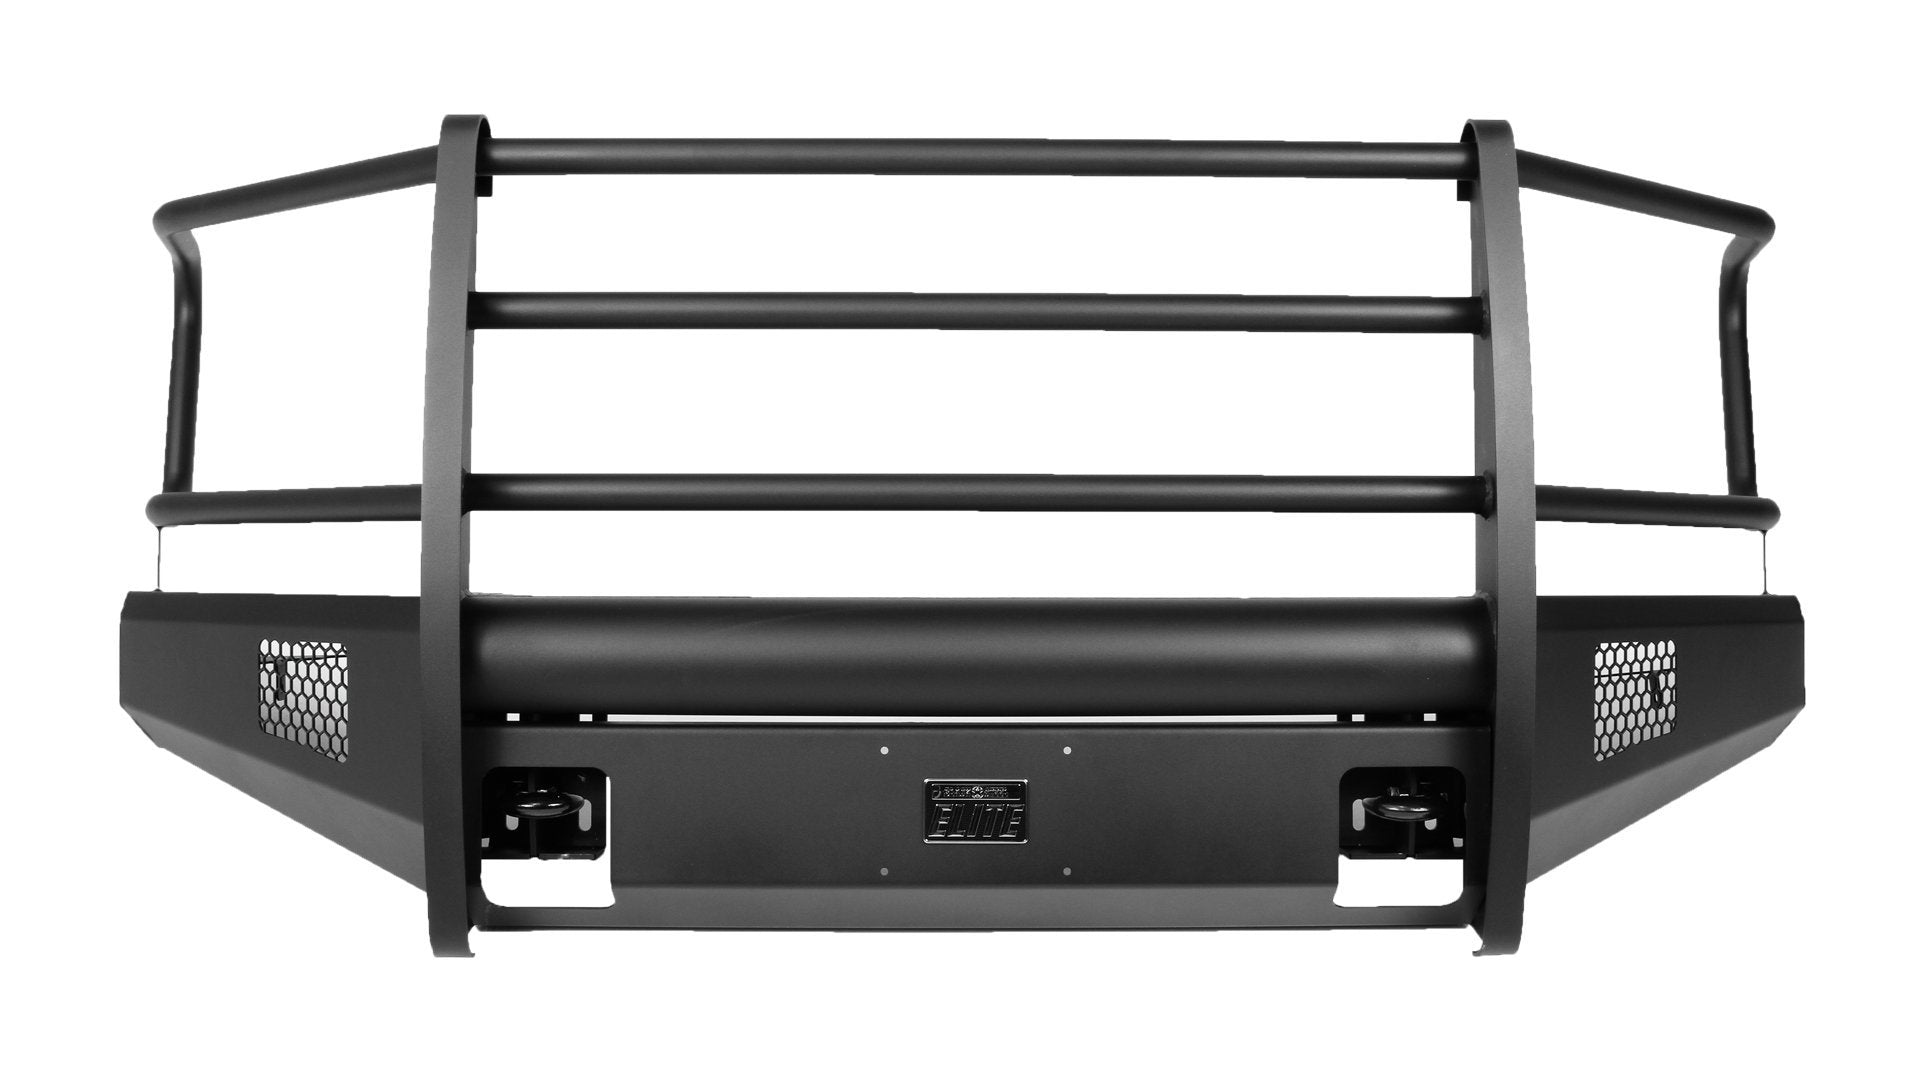 03-19 Chevy 2500/3500HD Black Steel Elite Series Front Bumper (Classic Body Style) full Grill Guard Fab Fours display